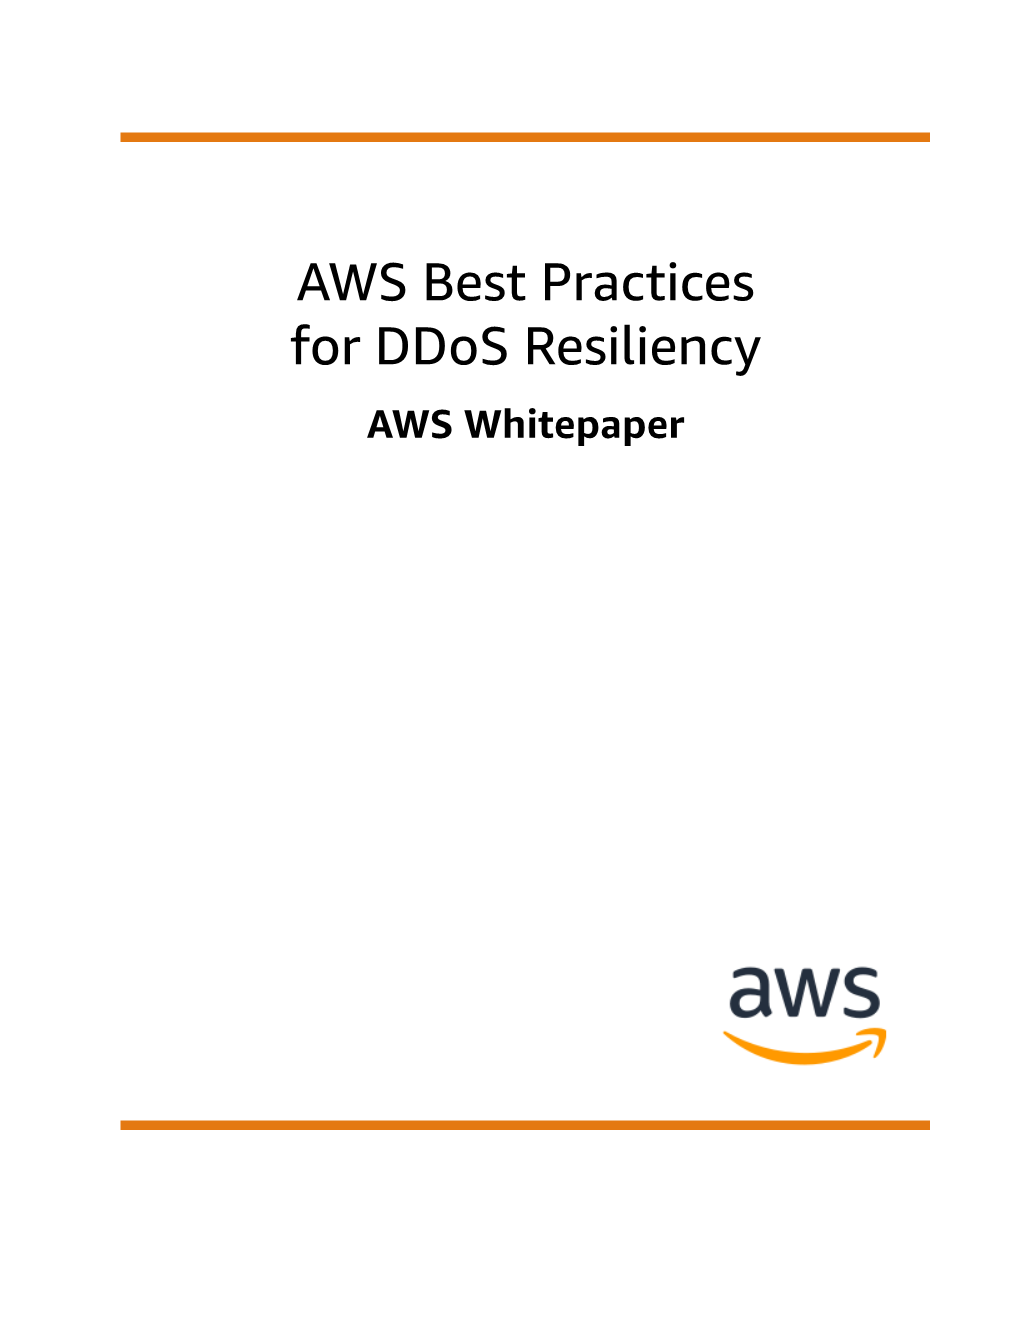 AWS Best Practices for Ddos Resiliency AWS Whitepaper AWS Best Practices for Ddos Resiliency AWS Whitepaper